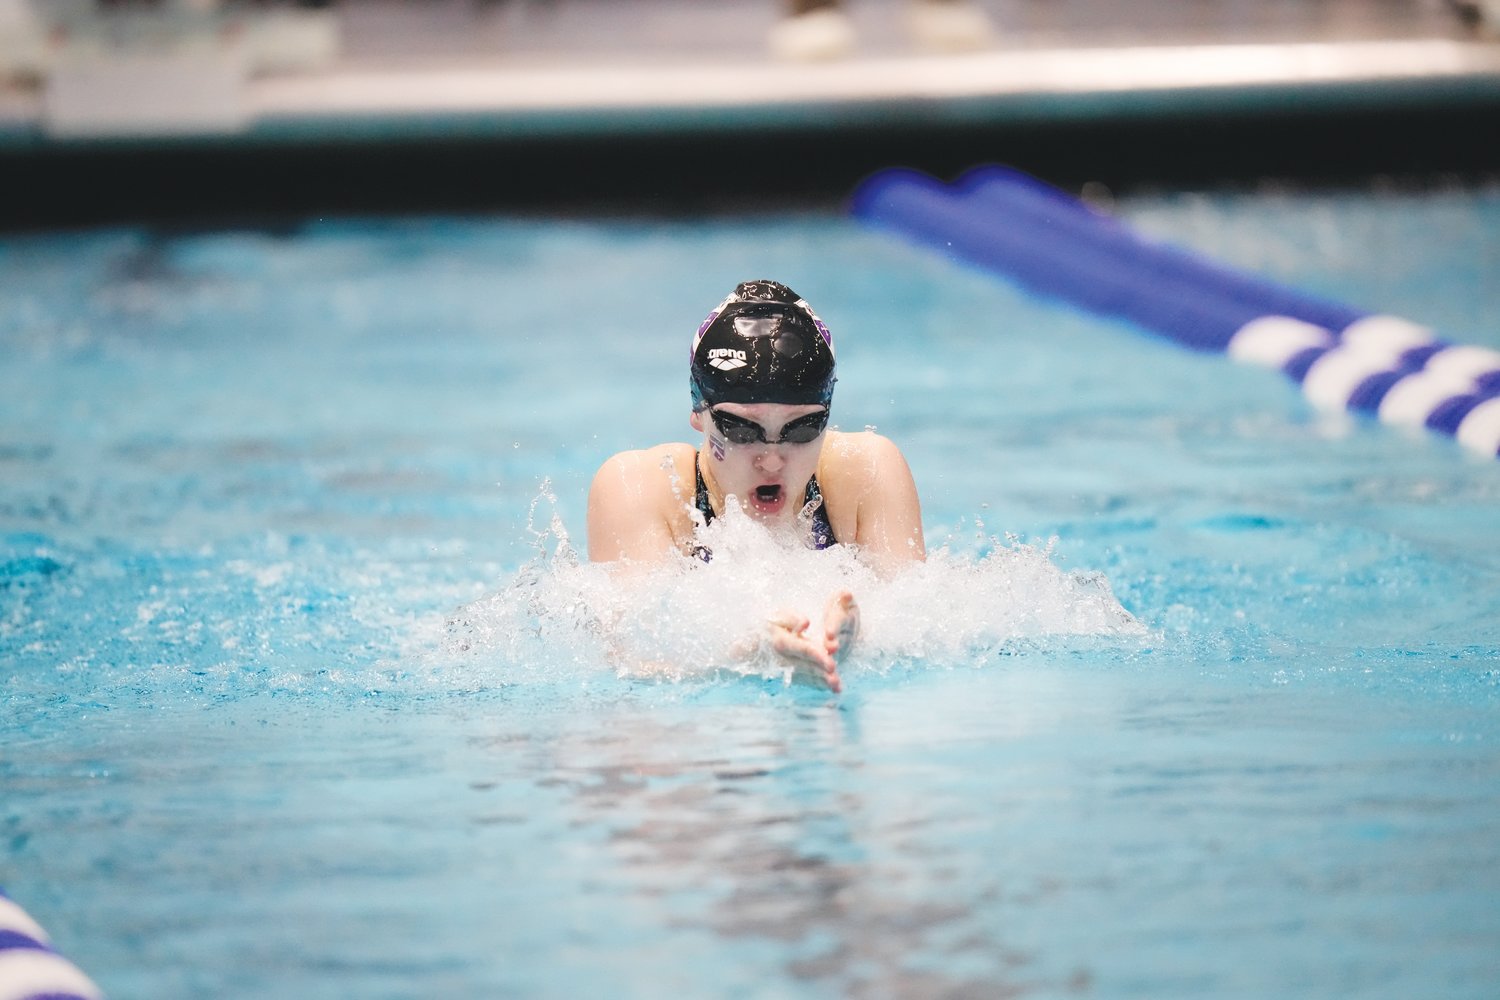 Kenyon swimmer Jennah Fadely slices through the water in one of her 5 races during the NCAA Division III Swimming & Diving National Championships in Indianapolis in March.